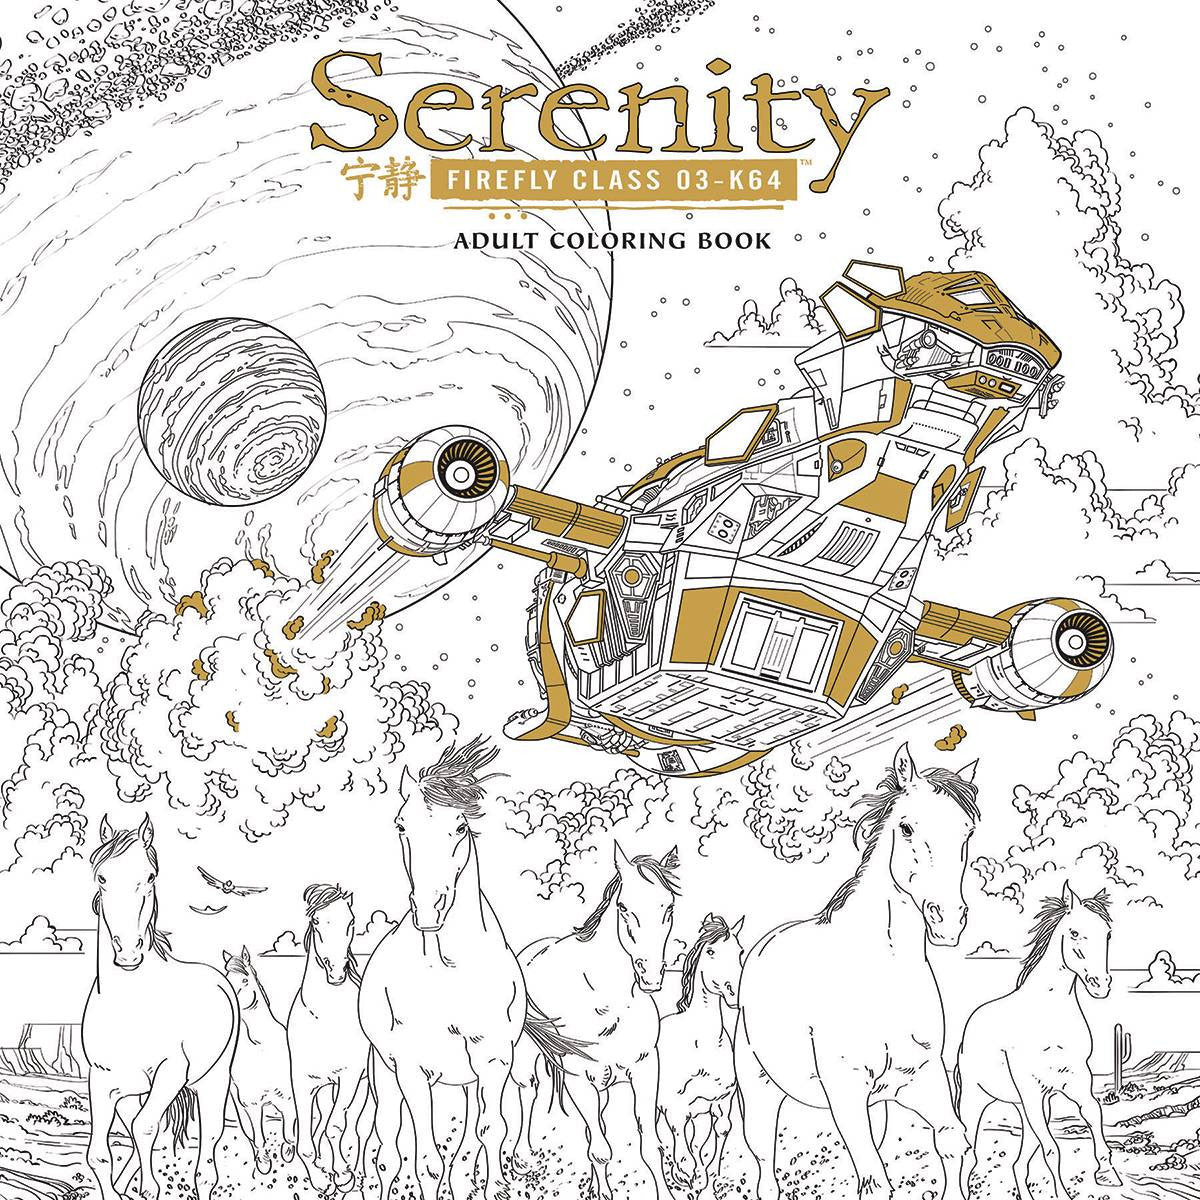 SERENITY ADULT COLOURING BOOK TP COVER